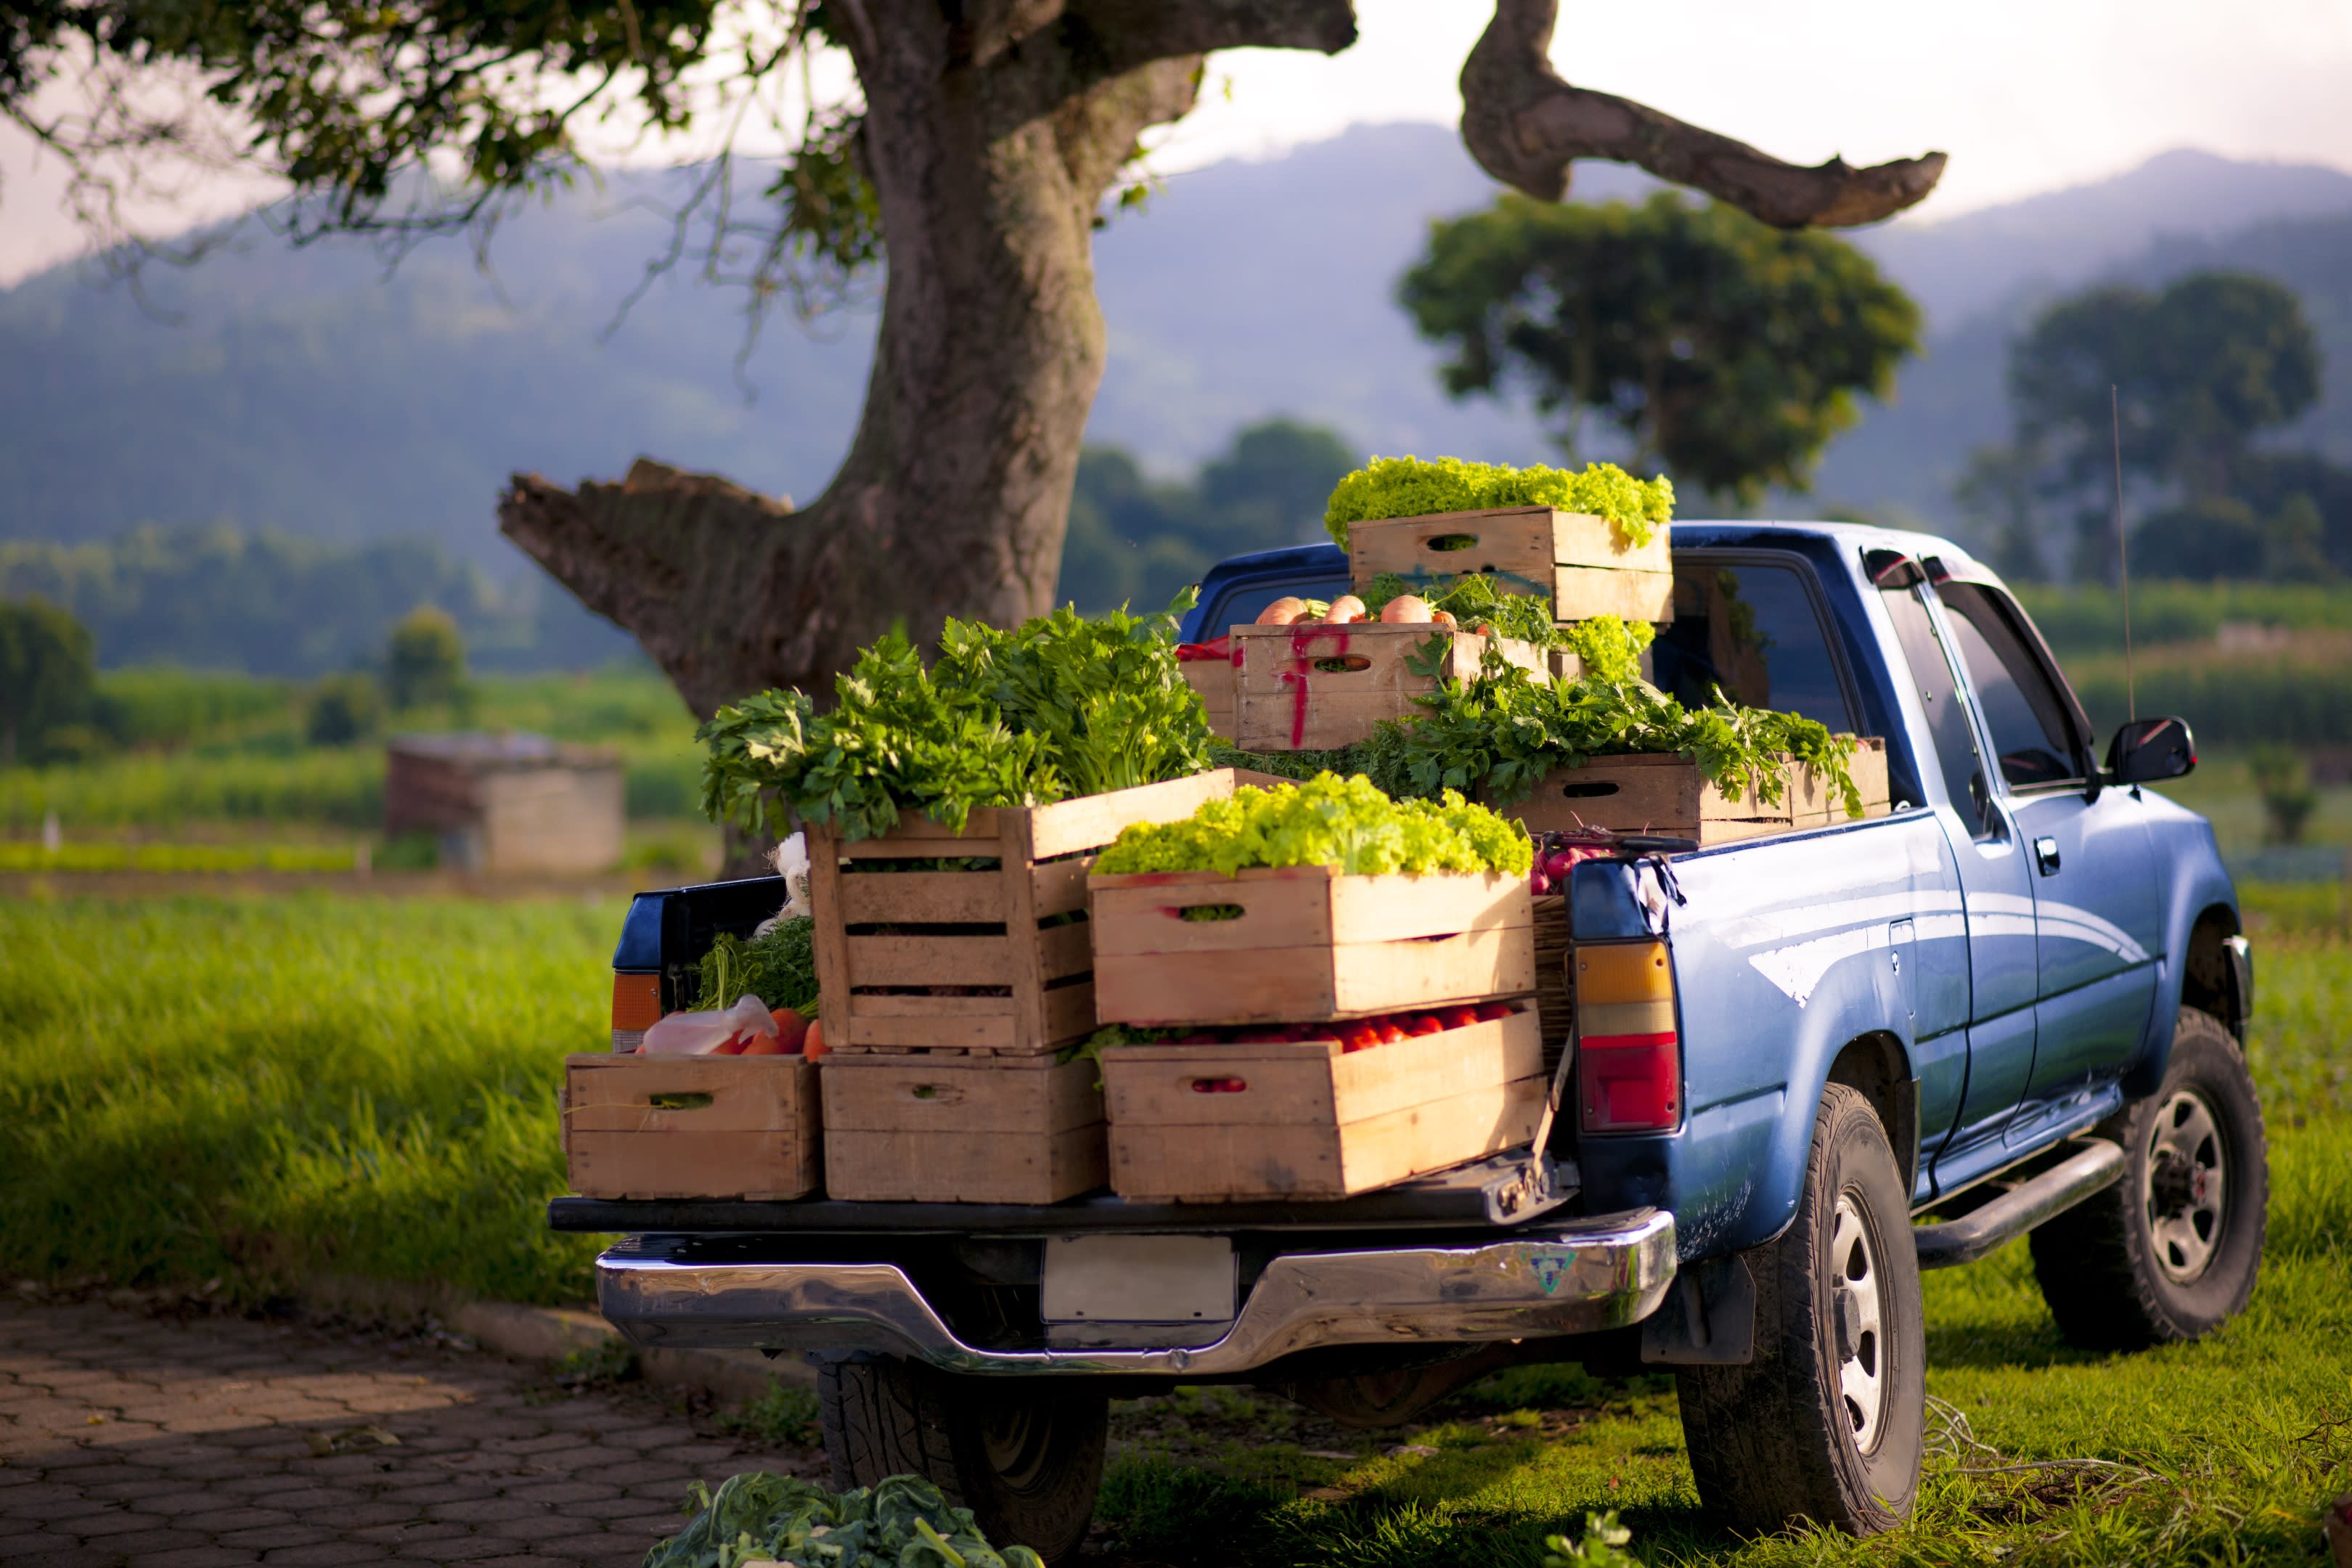 The Truck carry Vegetables from the Farm every Friday